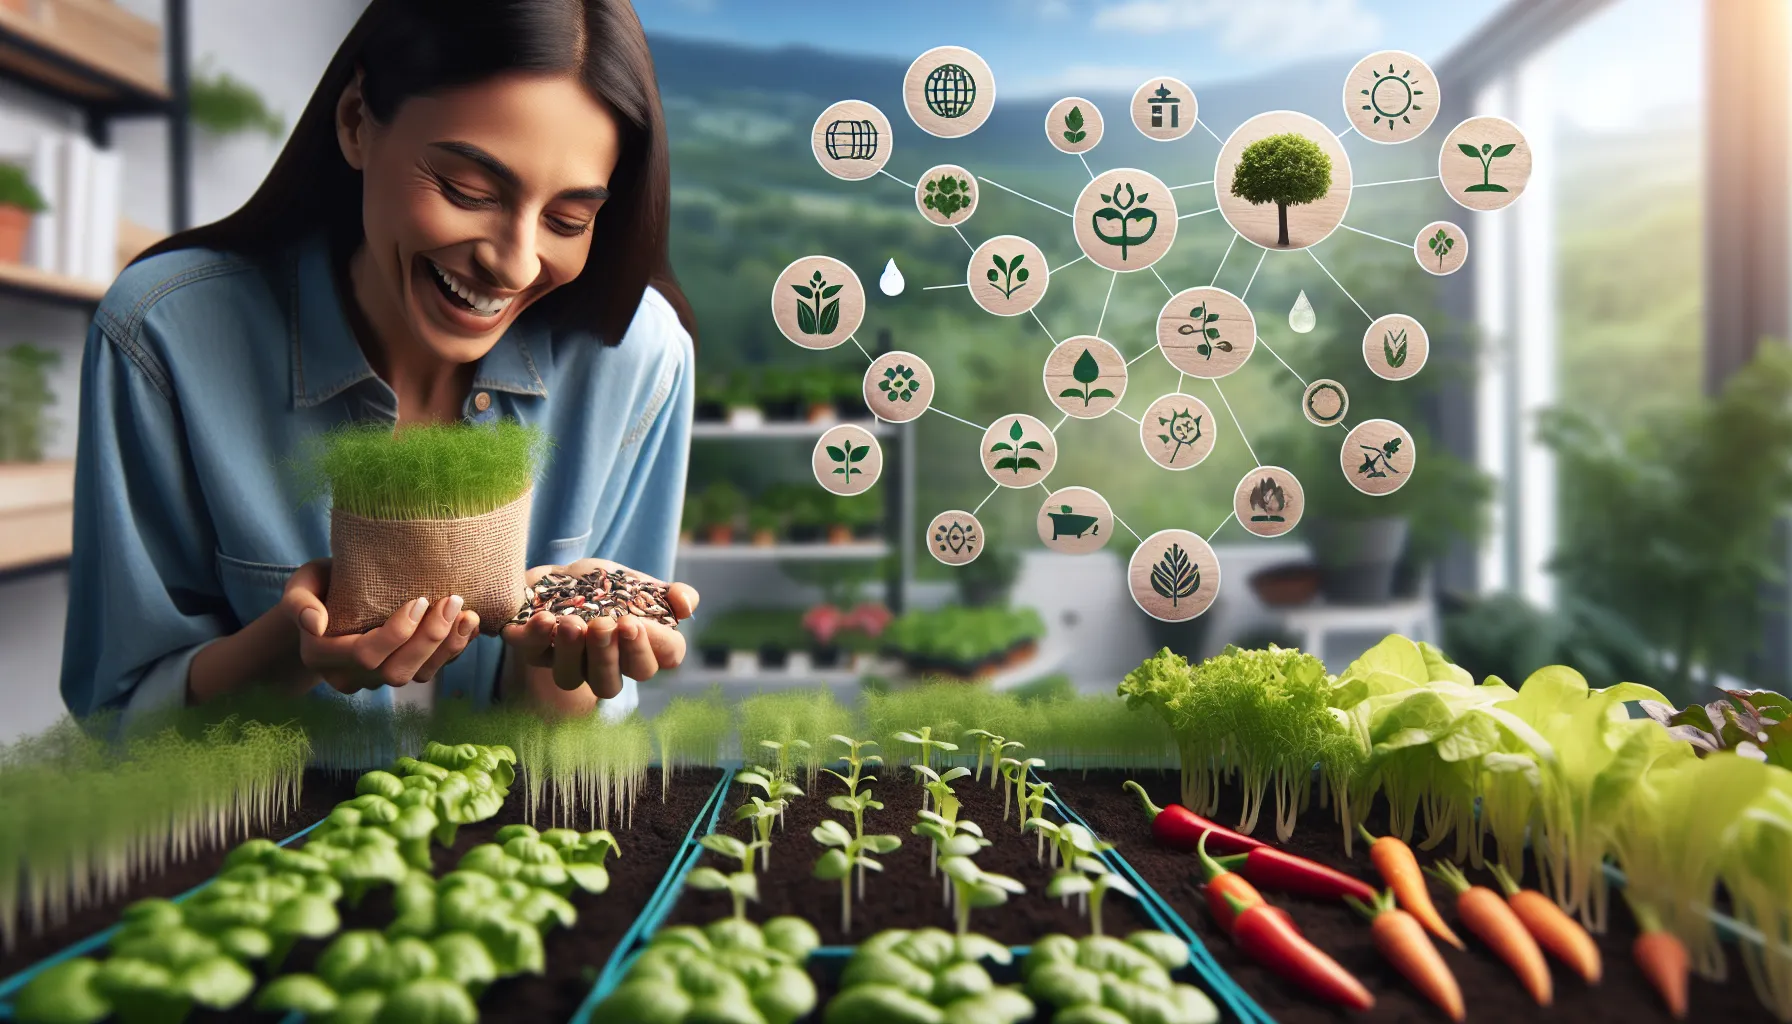 A smiling woman holding seeds and a potted plant with a lush vegetable garden in the foreground, and icons representing sustainable agriculture floating in the air.